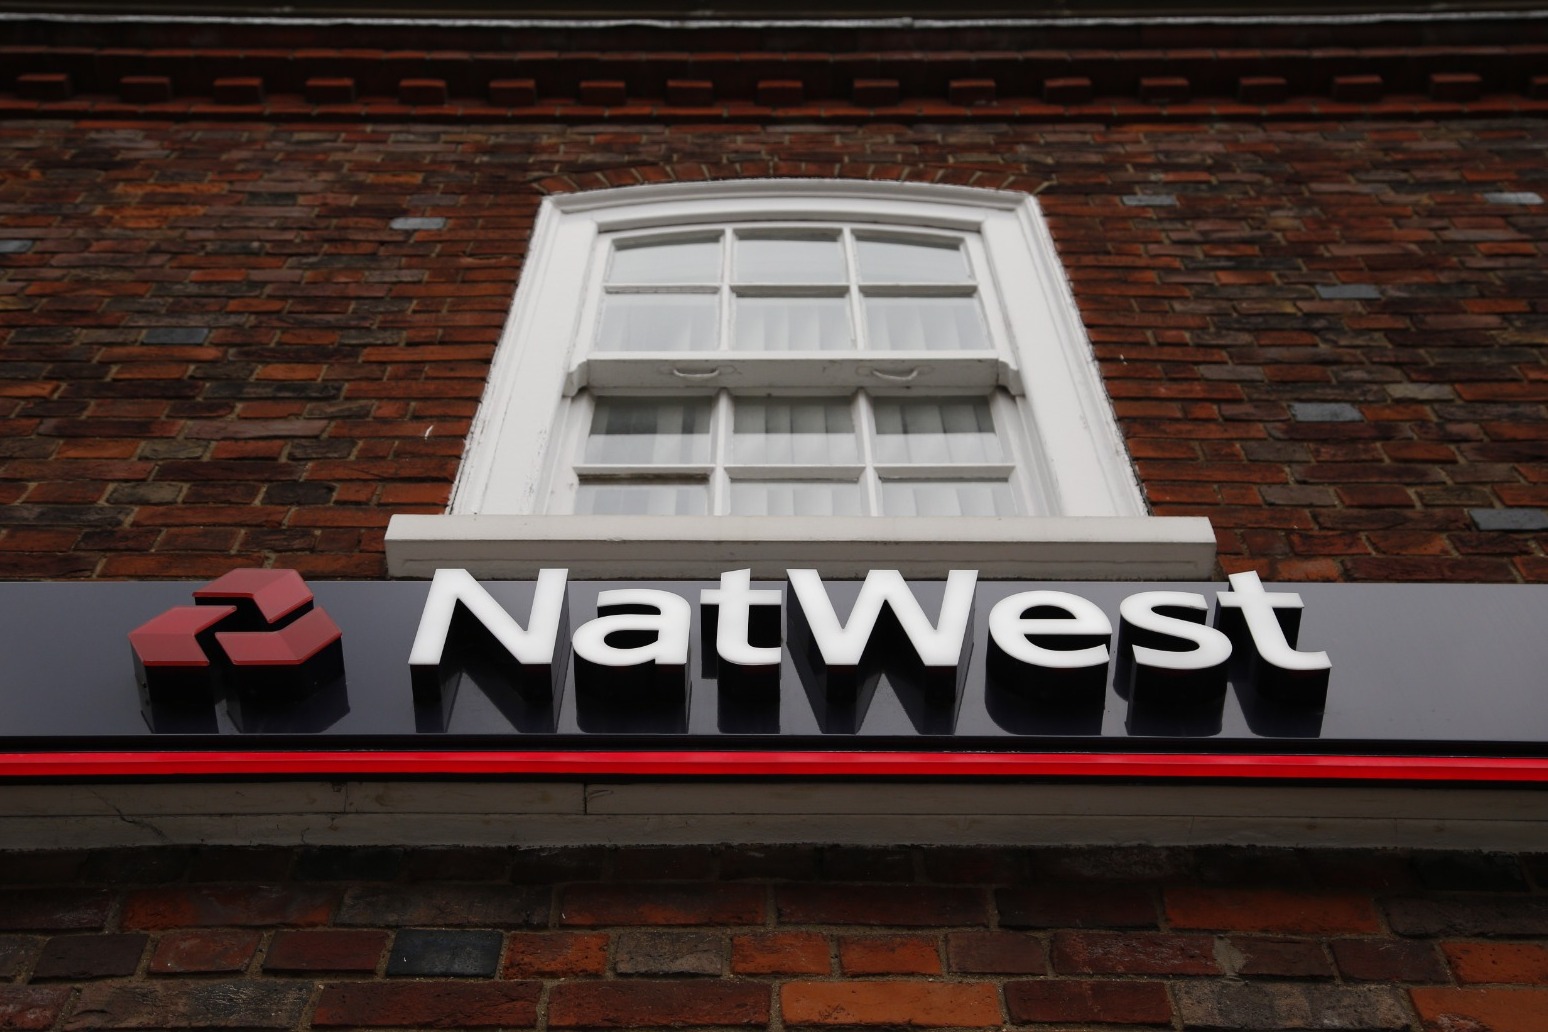 NatWest profits hit £1.2bn as bank benefits from rising interest rates 